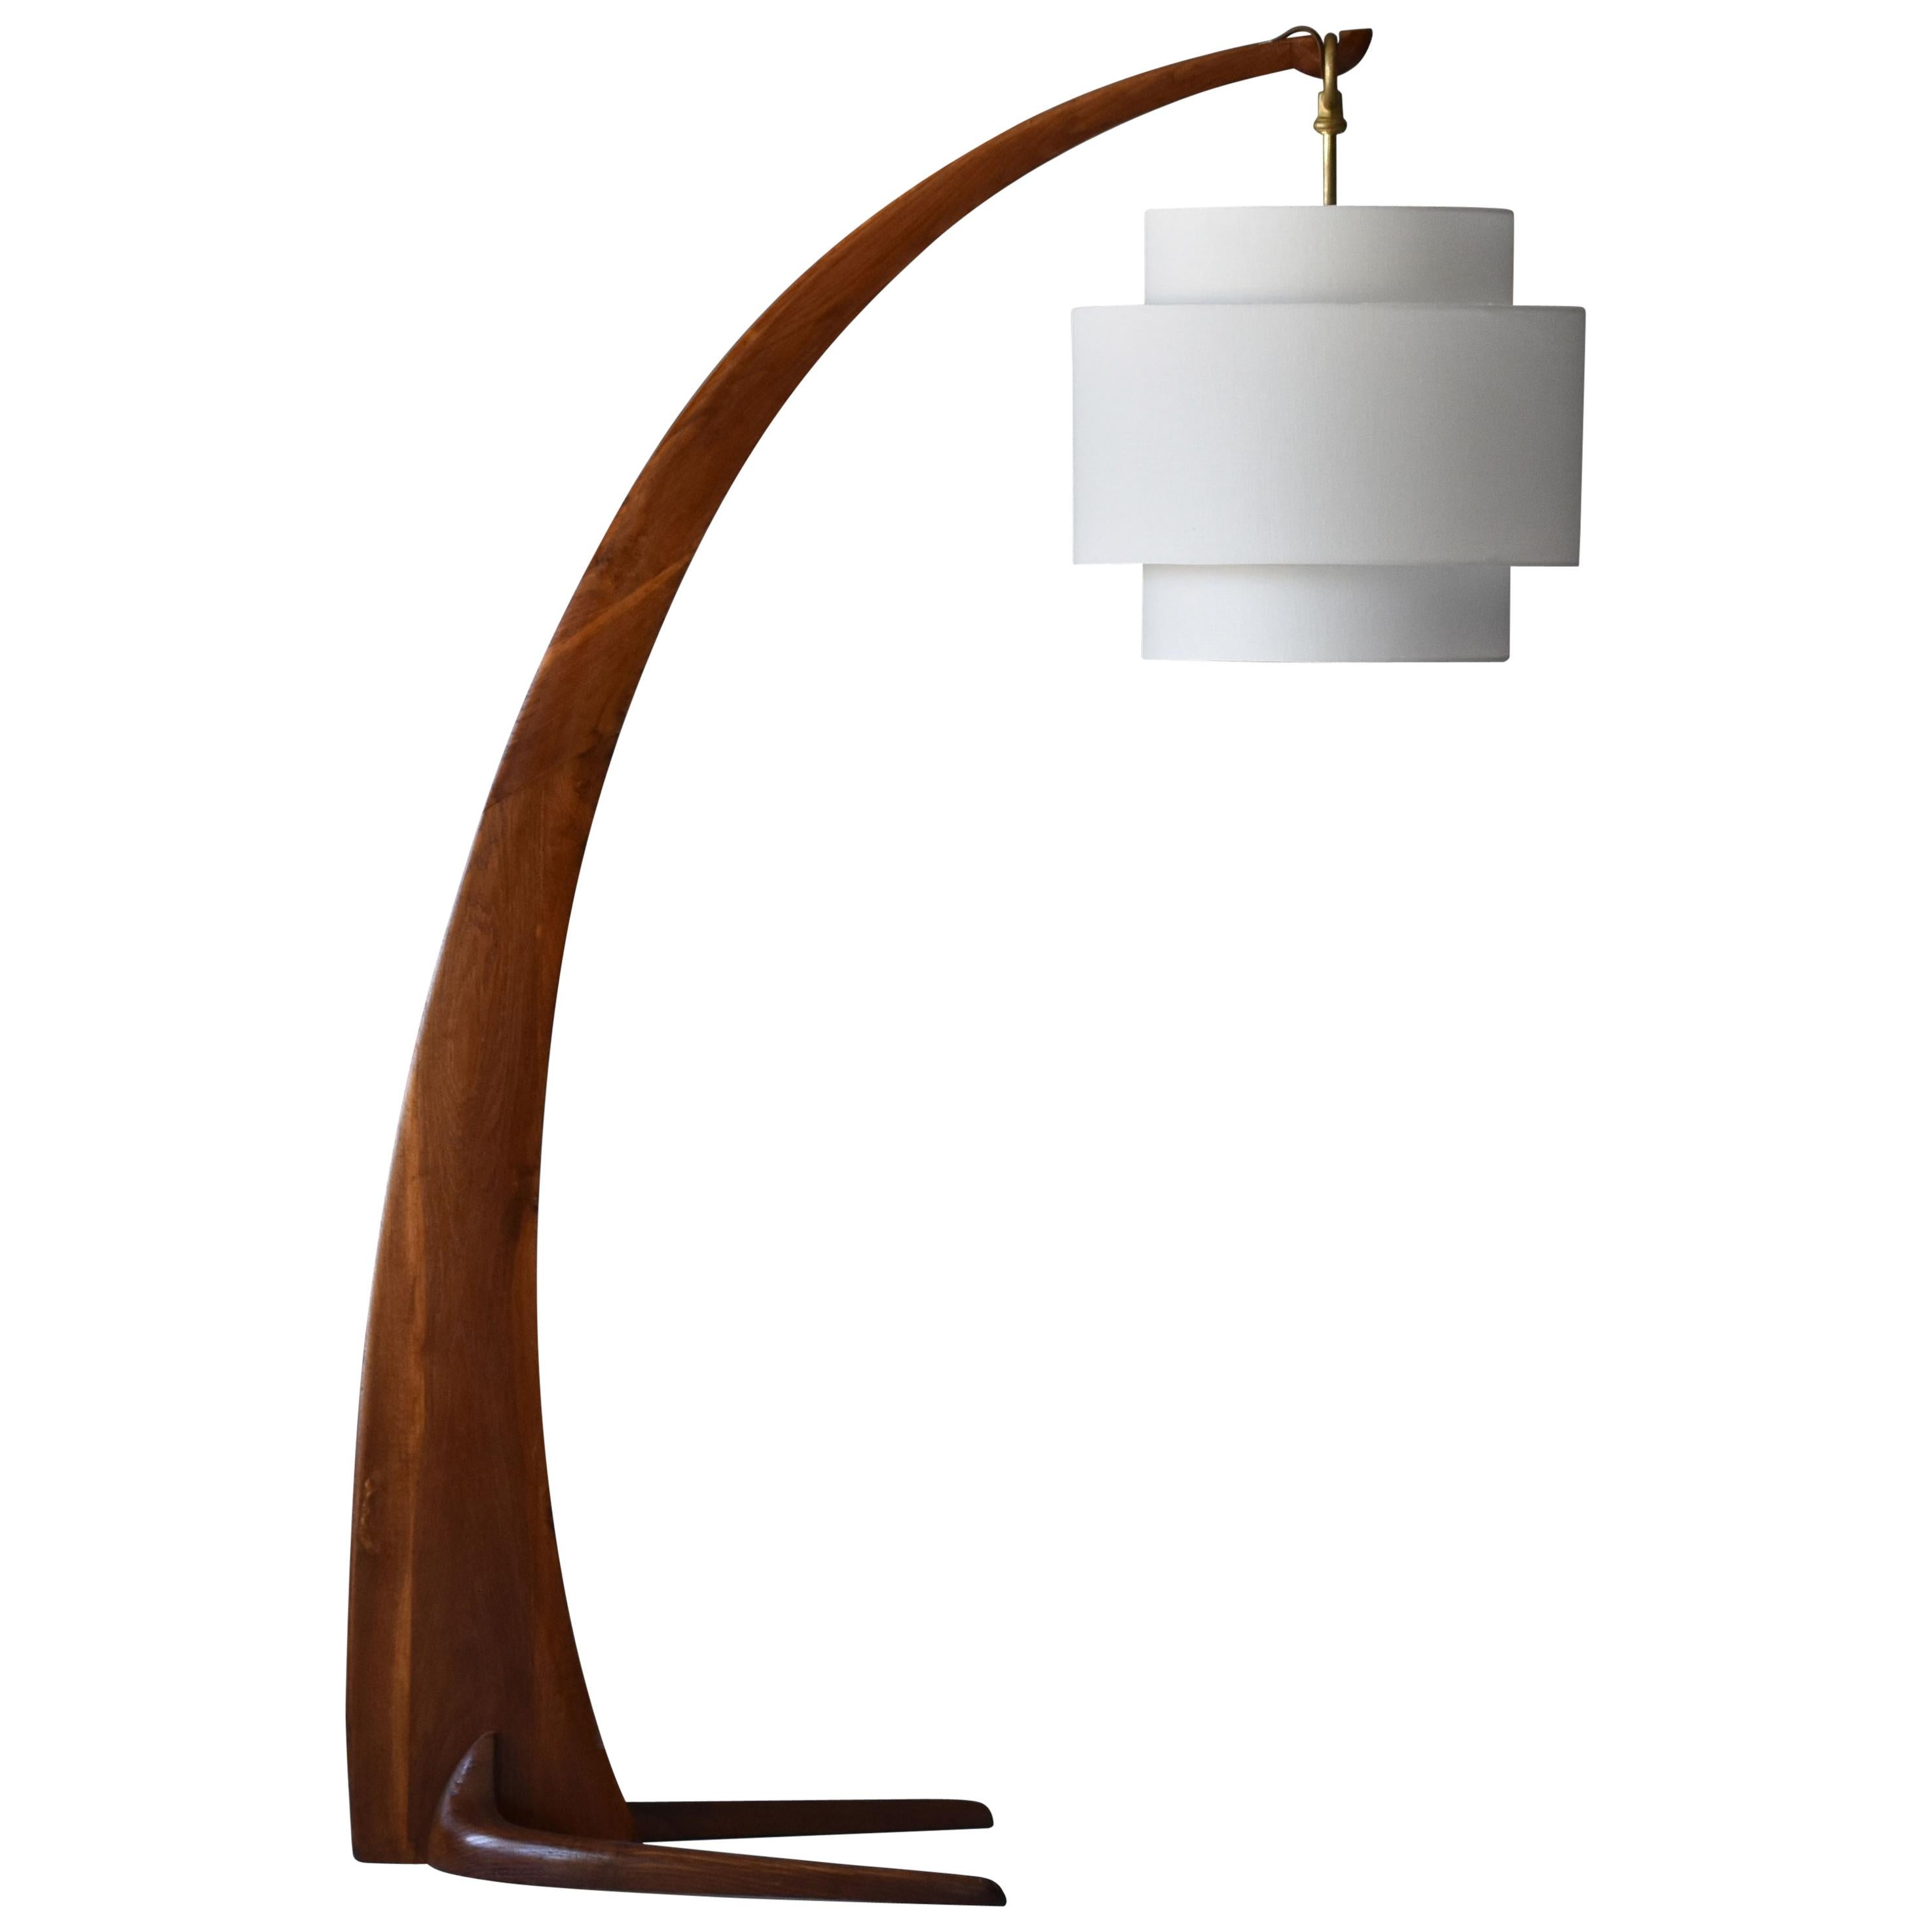 Large Modernist Curved Floor Lamp, Walnut, Brass, Fabric, Italy 1940s